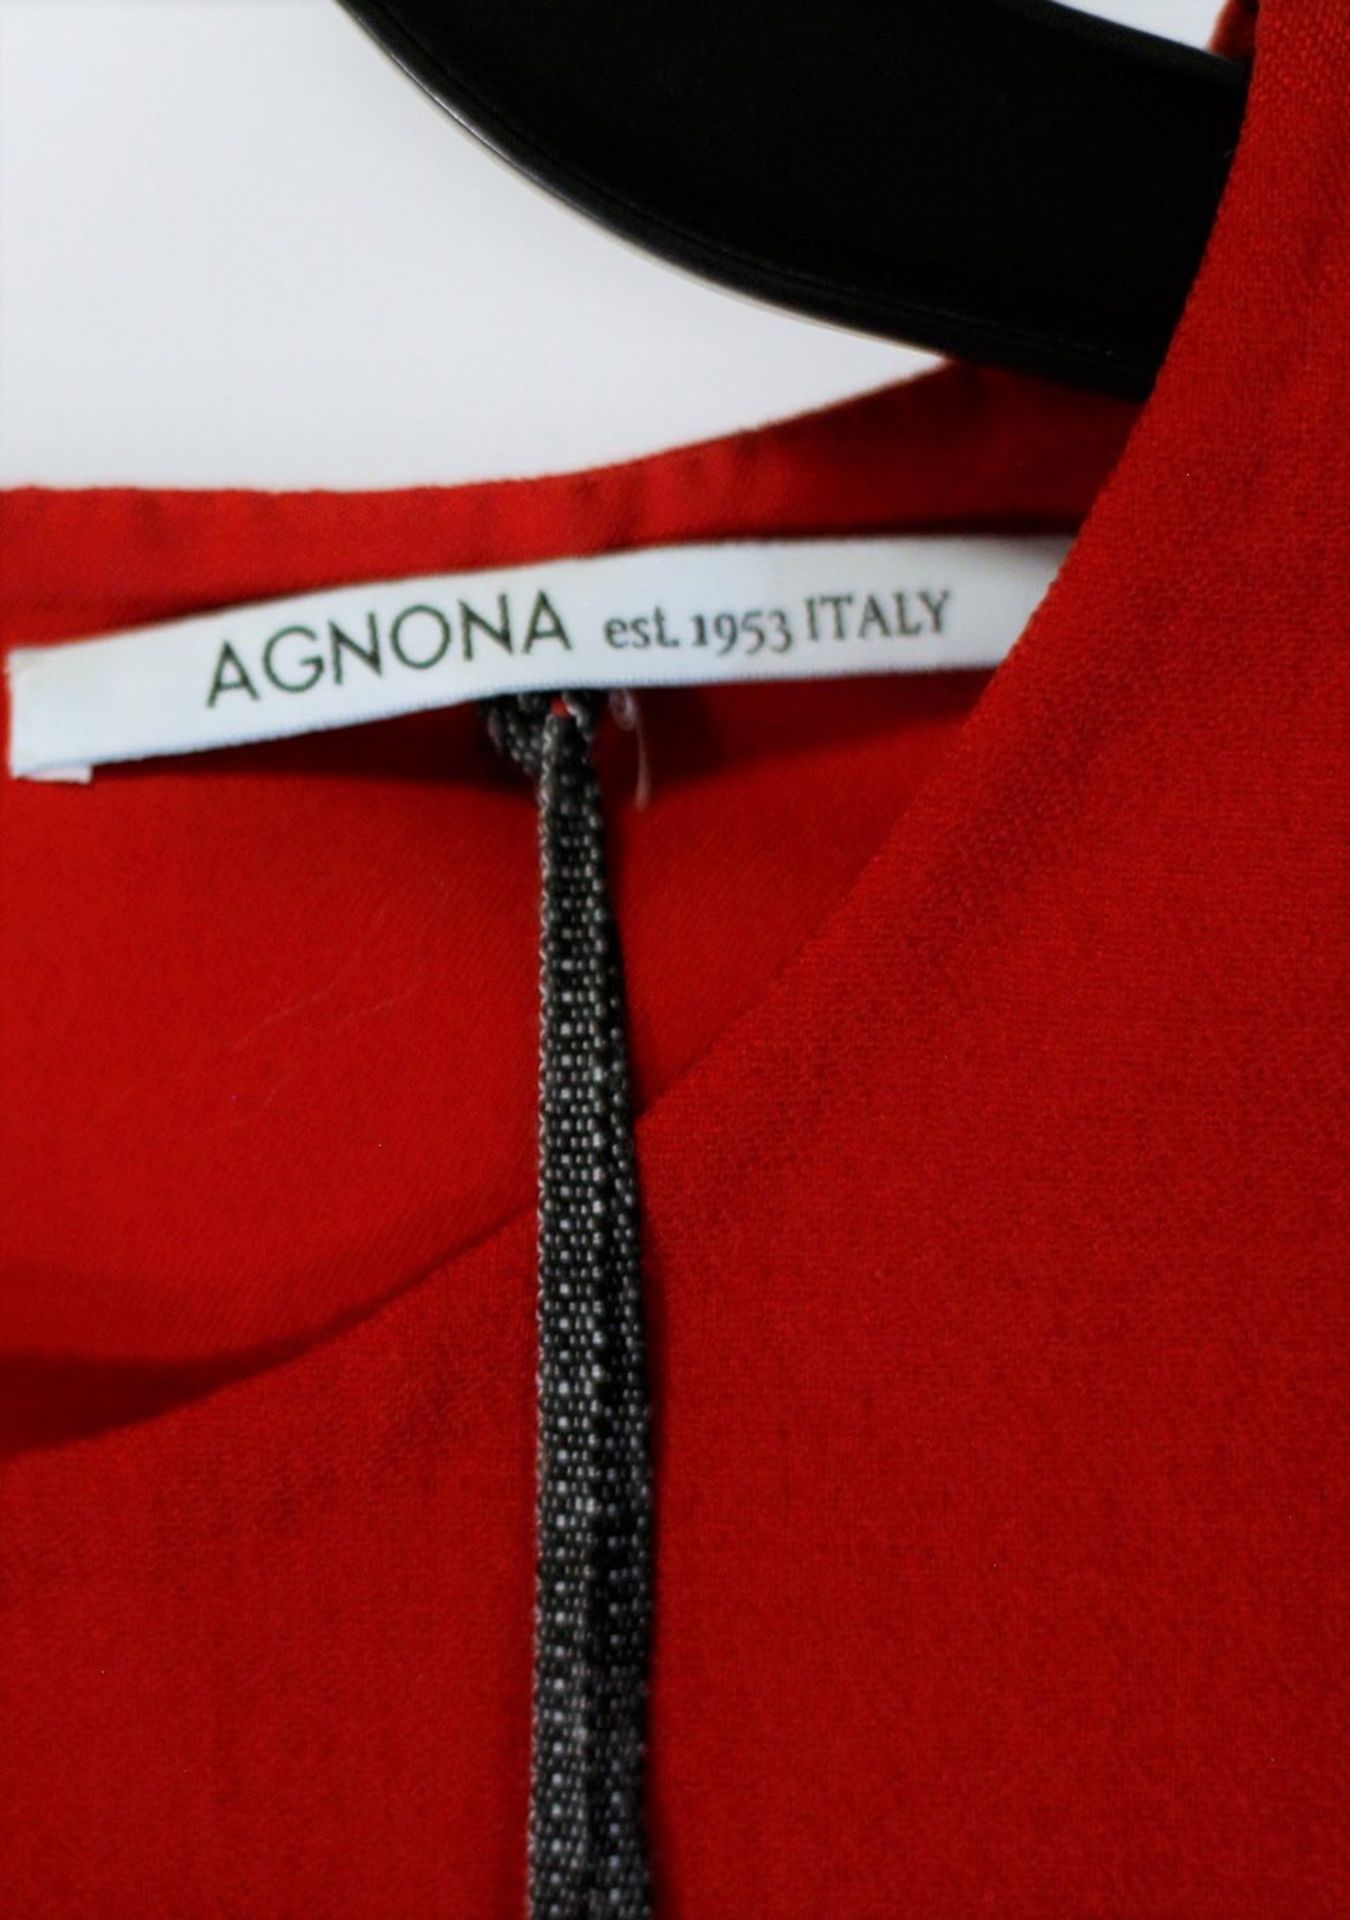 1 x Agnona Red Vest - Size: 18 - Material: 50% Cotton, 28% Mohair, 18% Silk, 4% Wool. Details 55% - Image 3 of 8